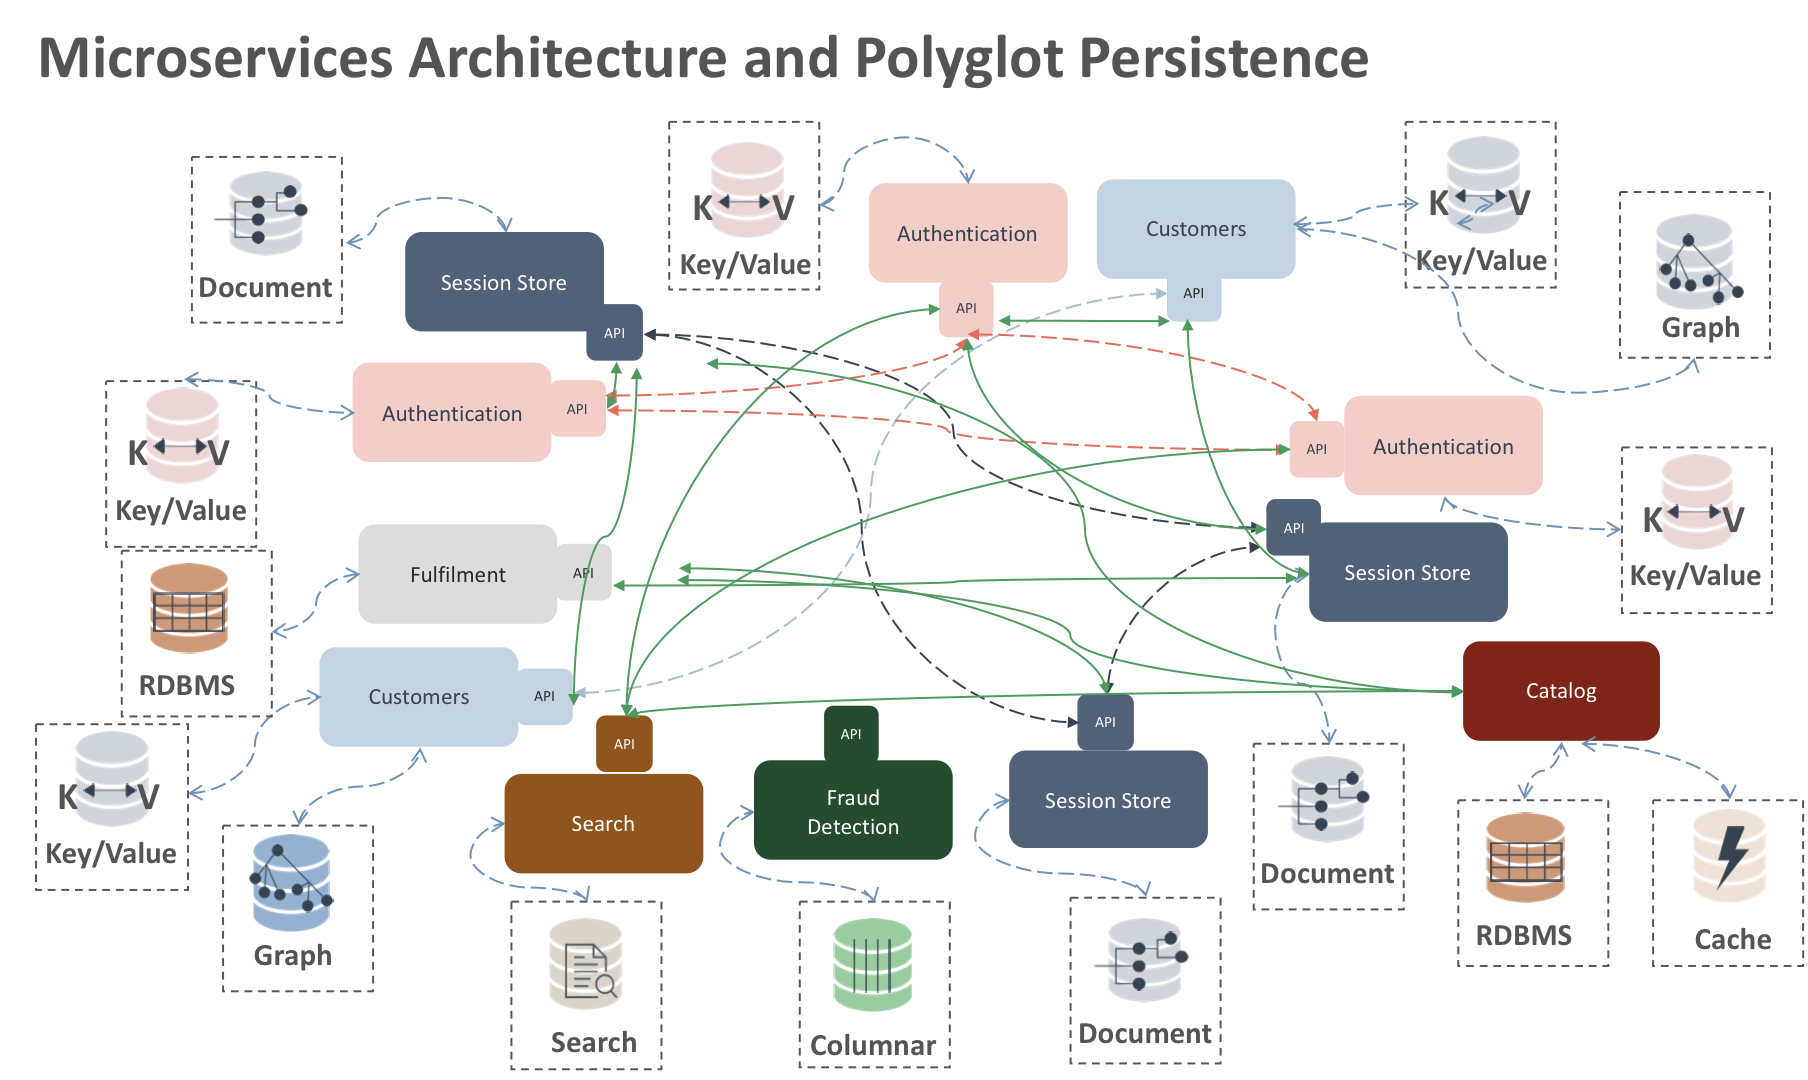 Microservices Architecture and Polyglot Persistence